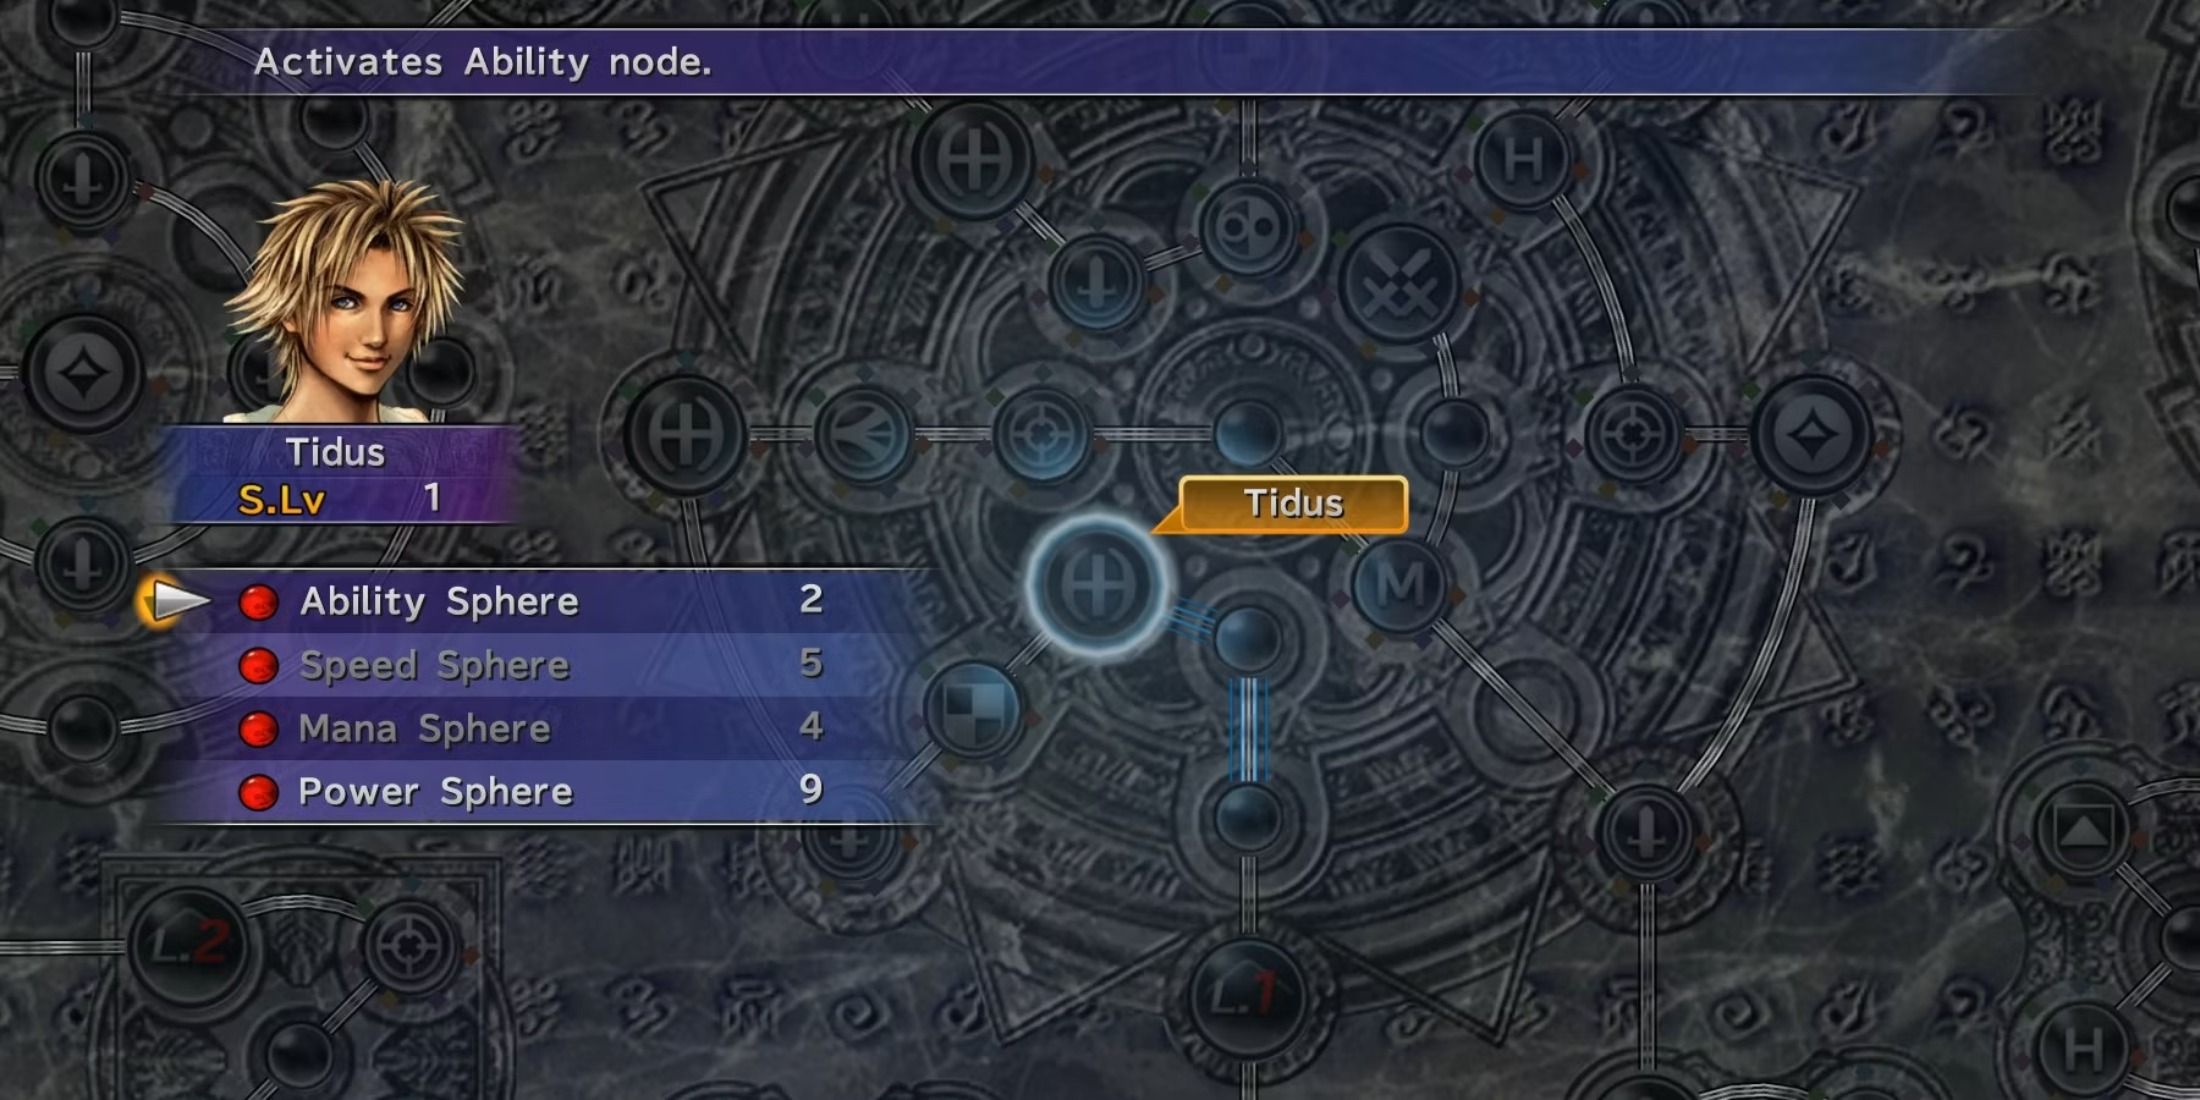 Final Fantasy 10 Tidus in the Sphere Grid system